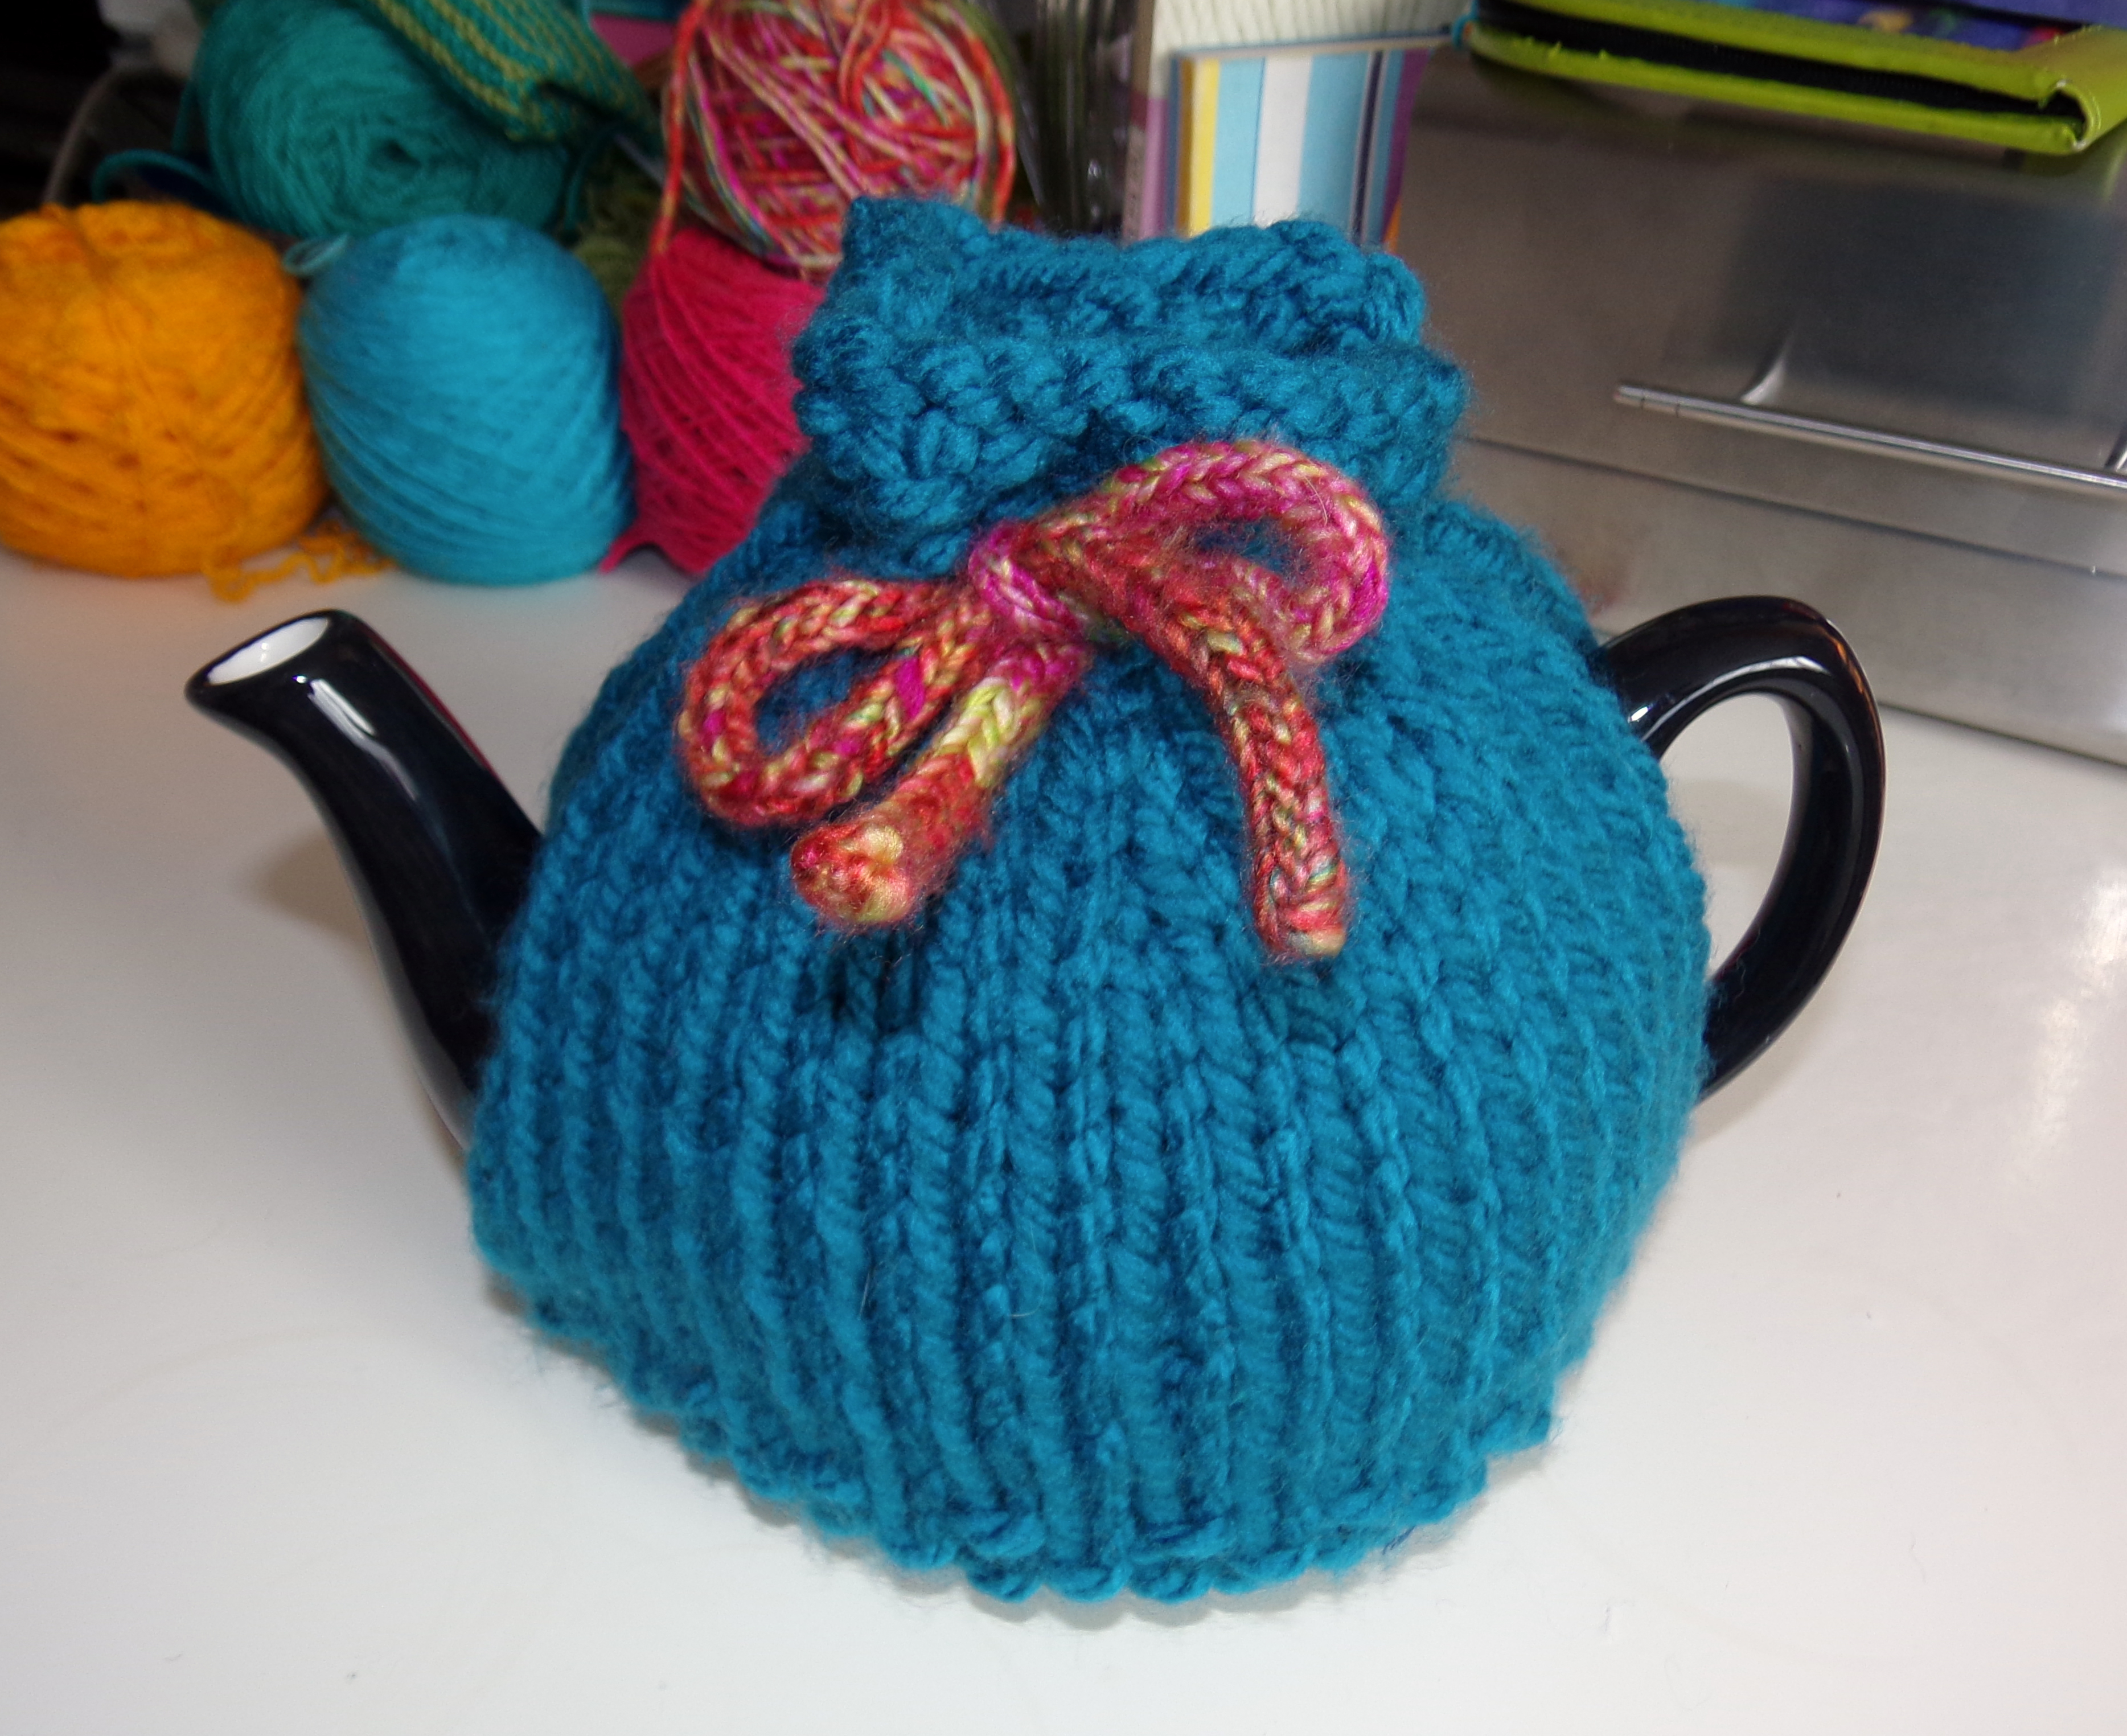 Tea Cozy Patterns To Knit Three Free Tea Cosy Patterns Reviewed Or Why Tea Pots Are Better